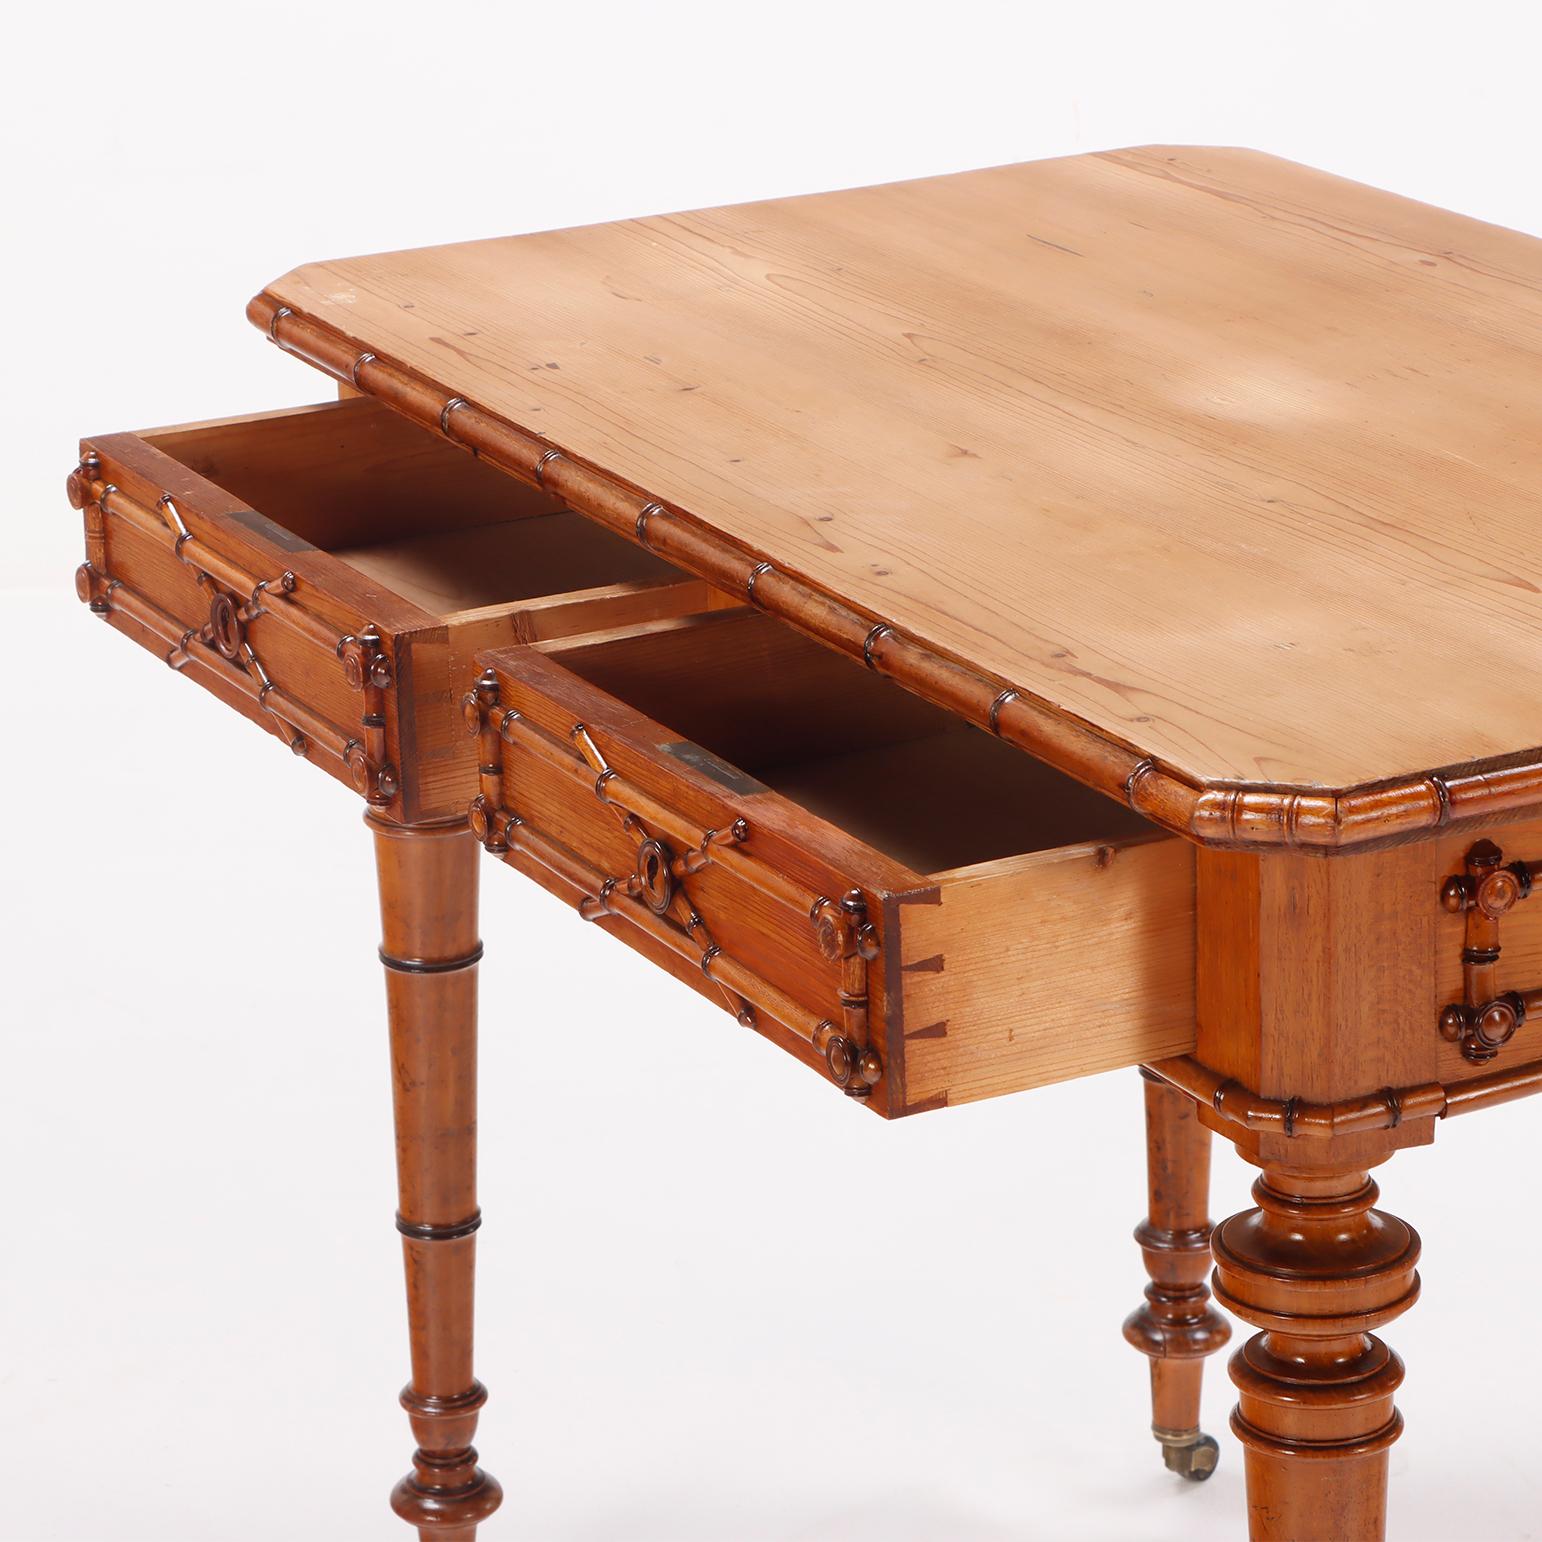 Late 19th Century French Faux bamboo writing desk having two drawers circa 1880.